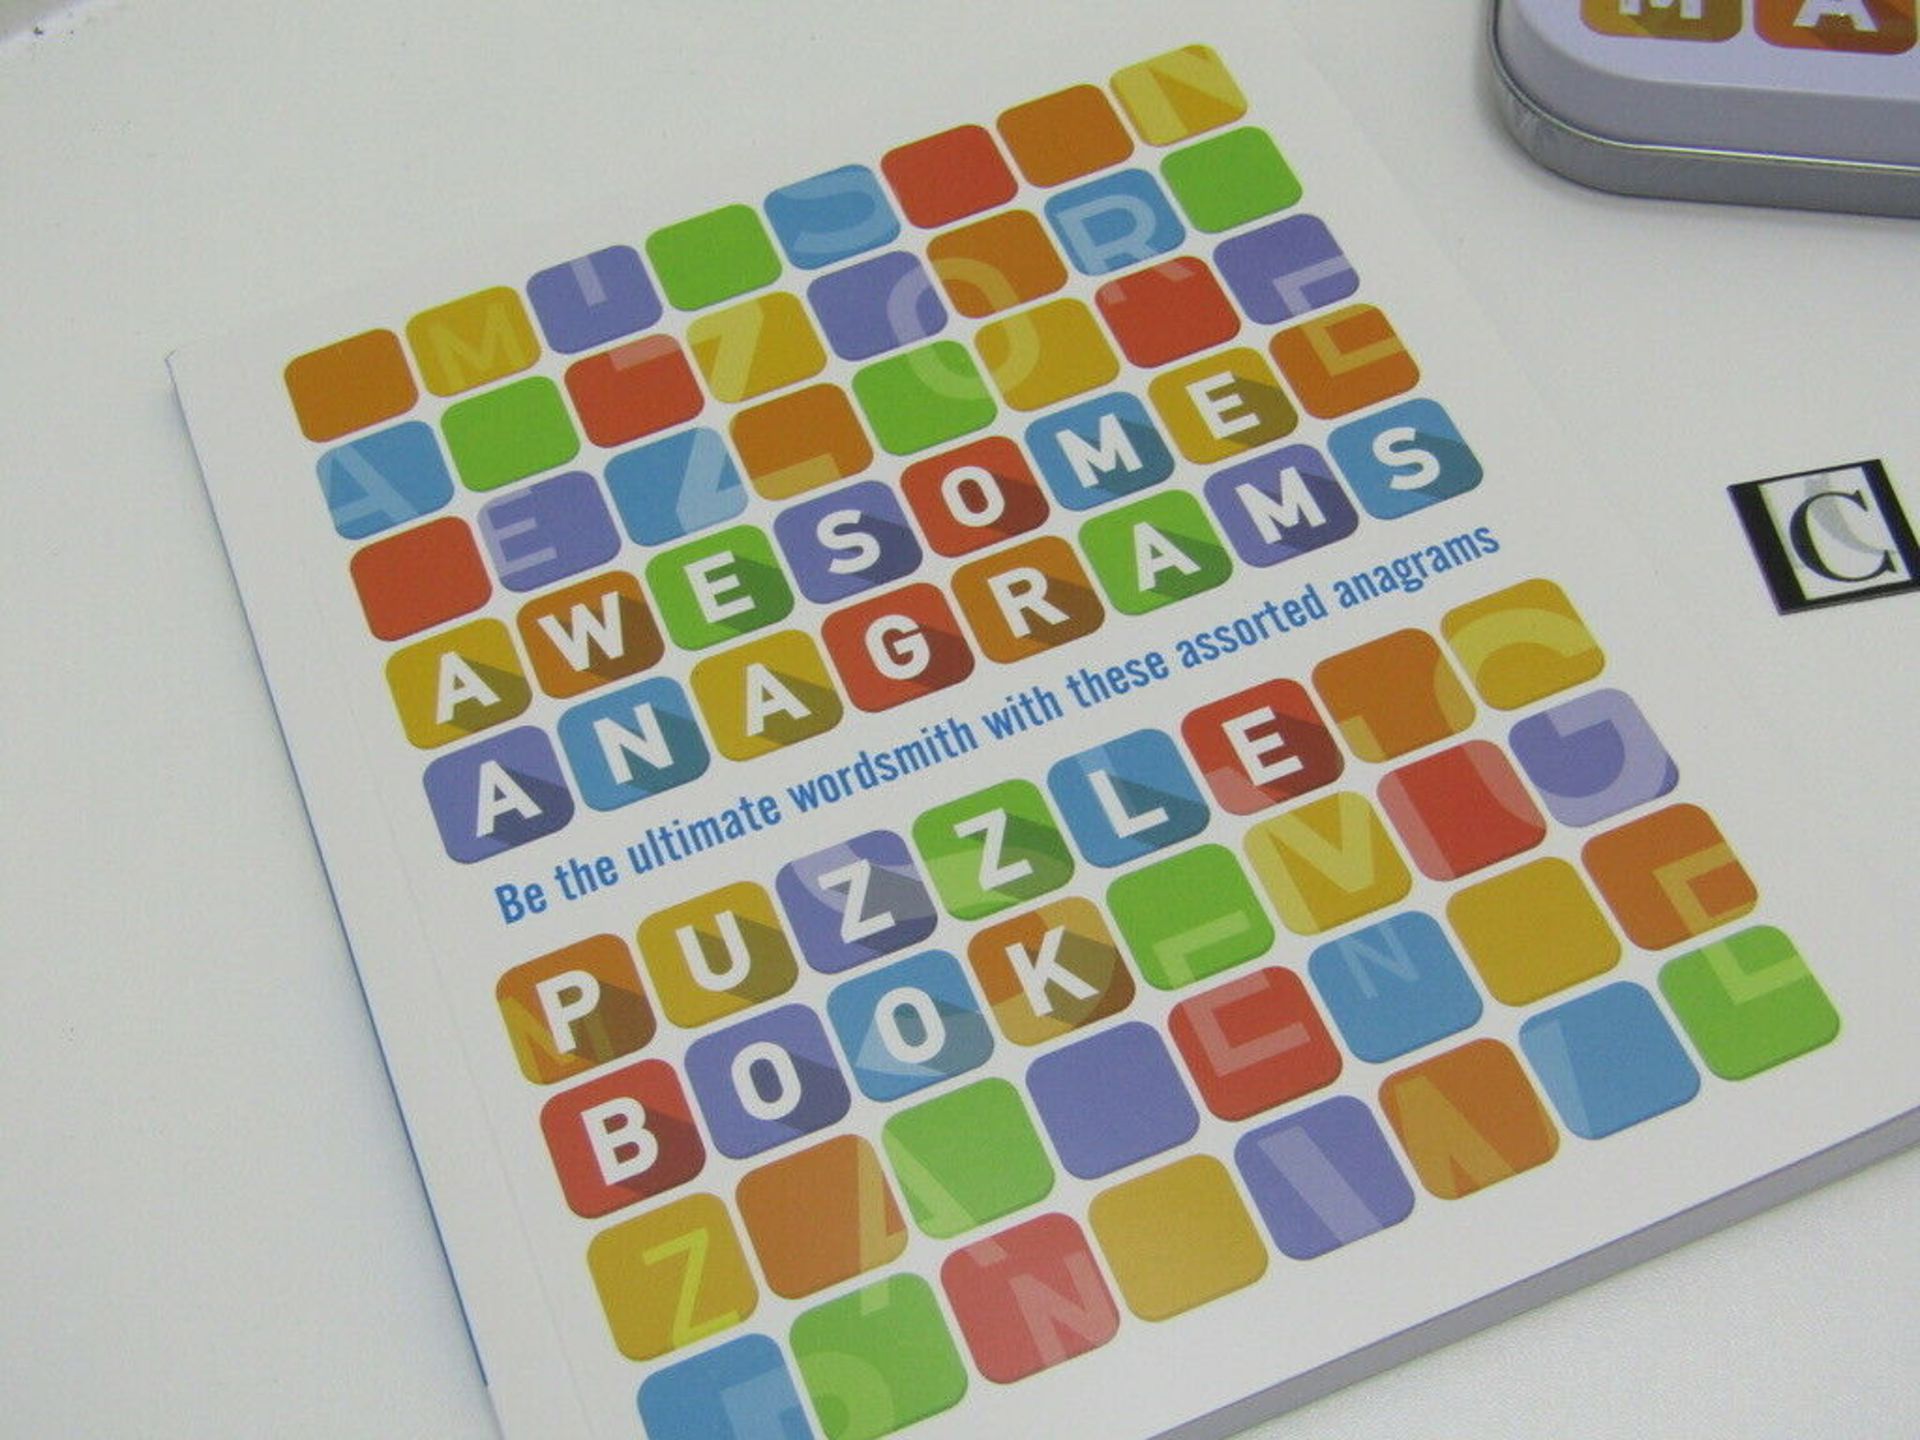 4 x Awesome Anagrams Puzzle Book & Magnet Set. Game. - Image 4 of 5